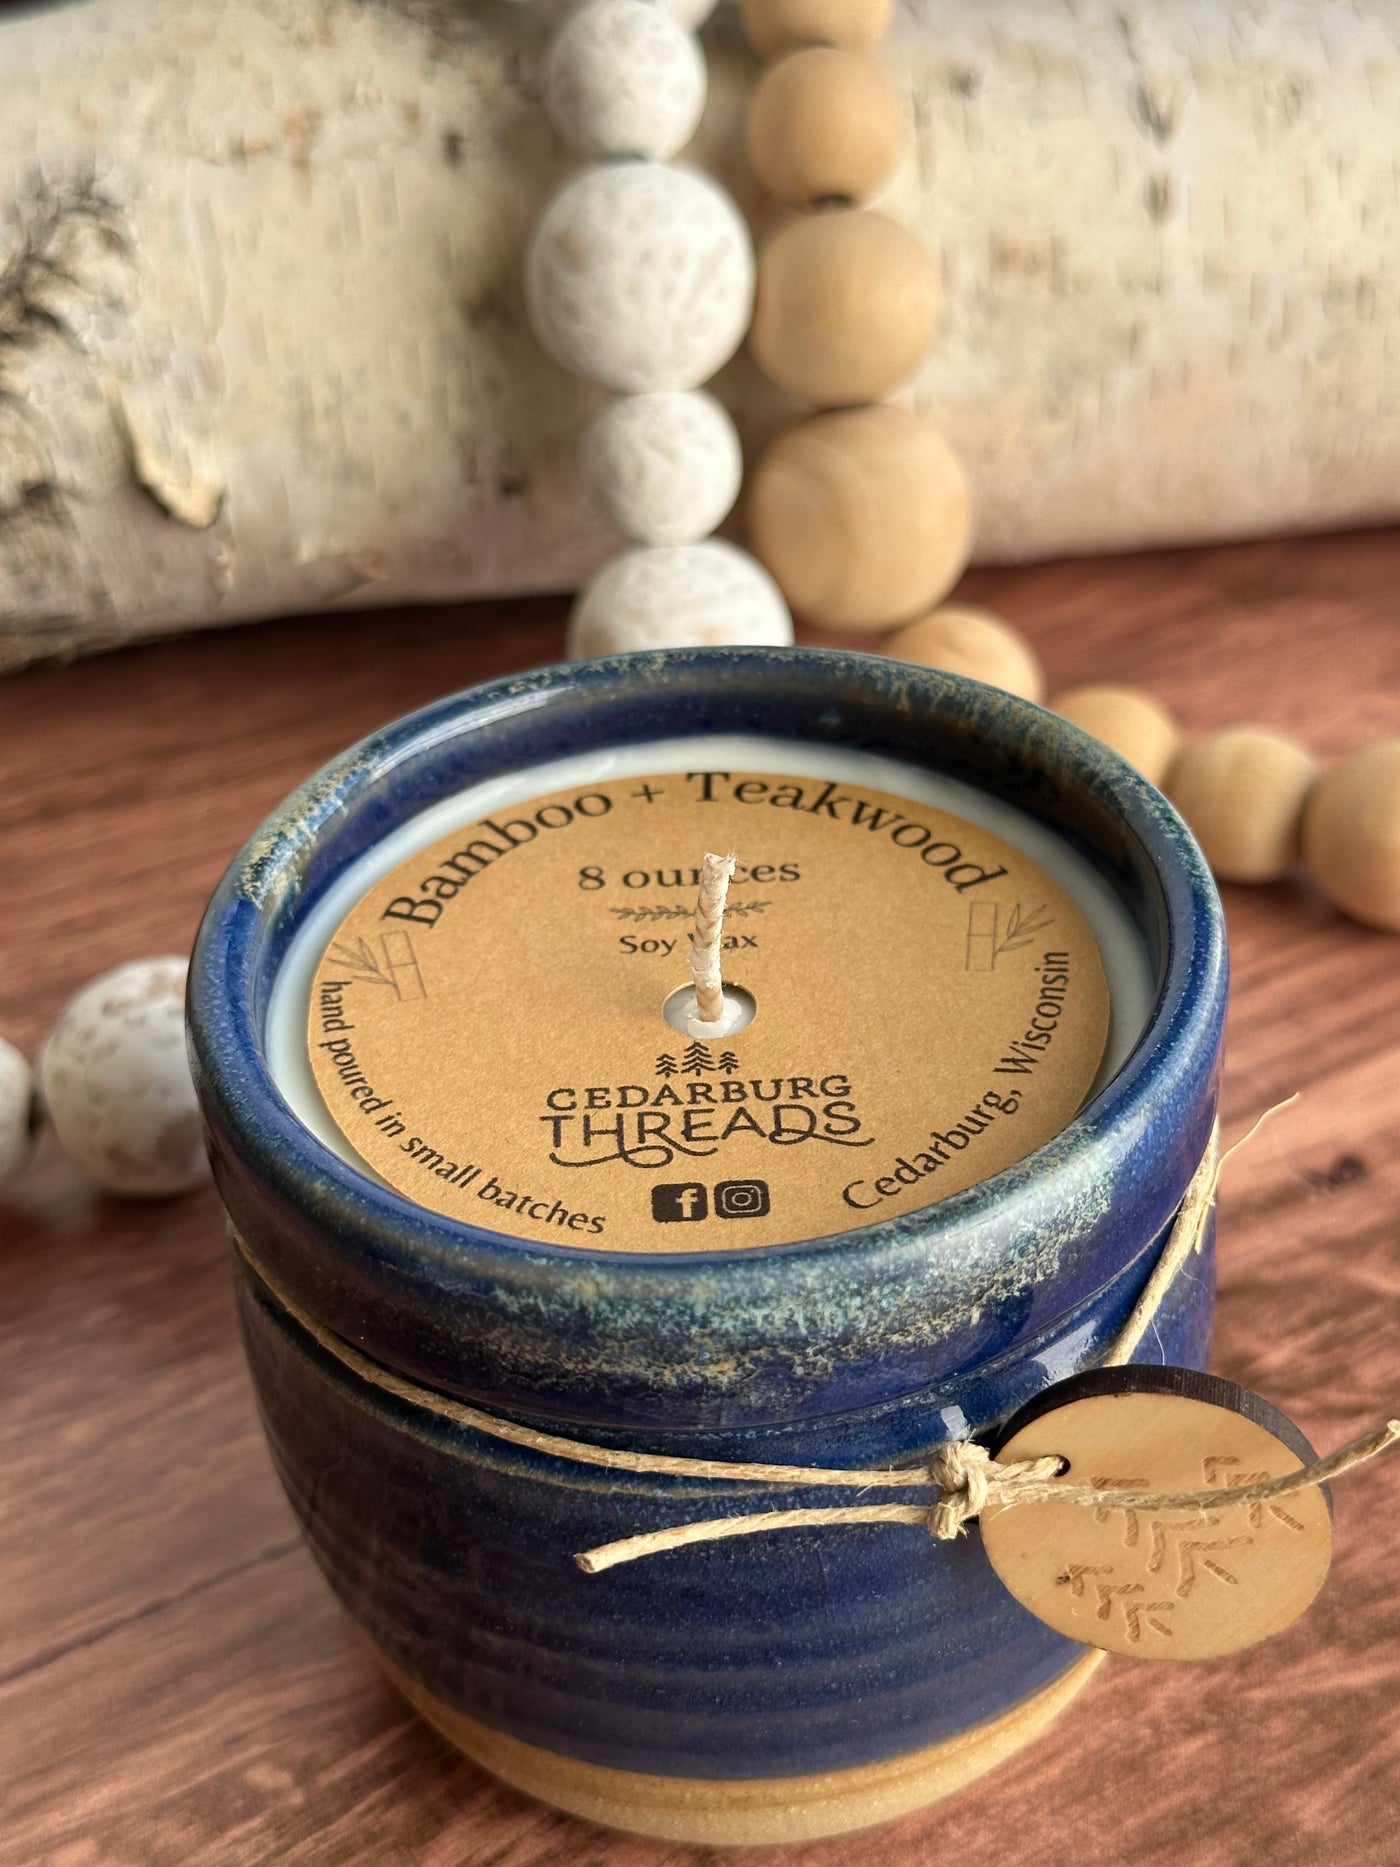 8 oz Bamboo & Teakwood soy candle in blue ceramic vessel